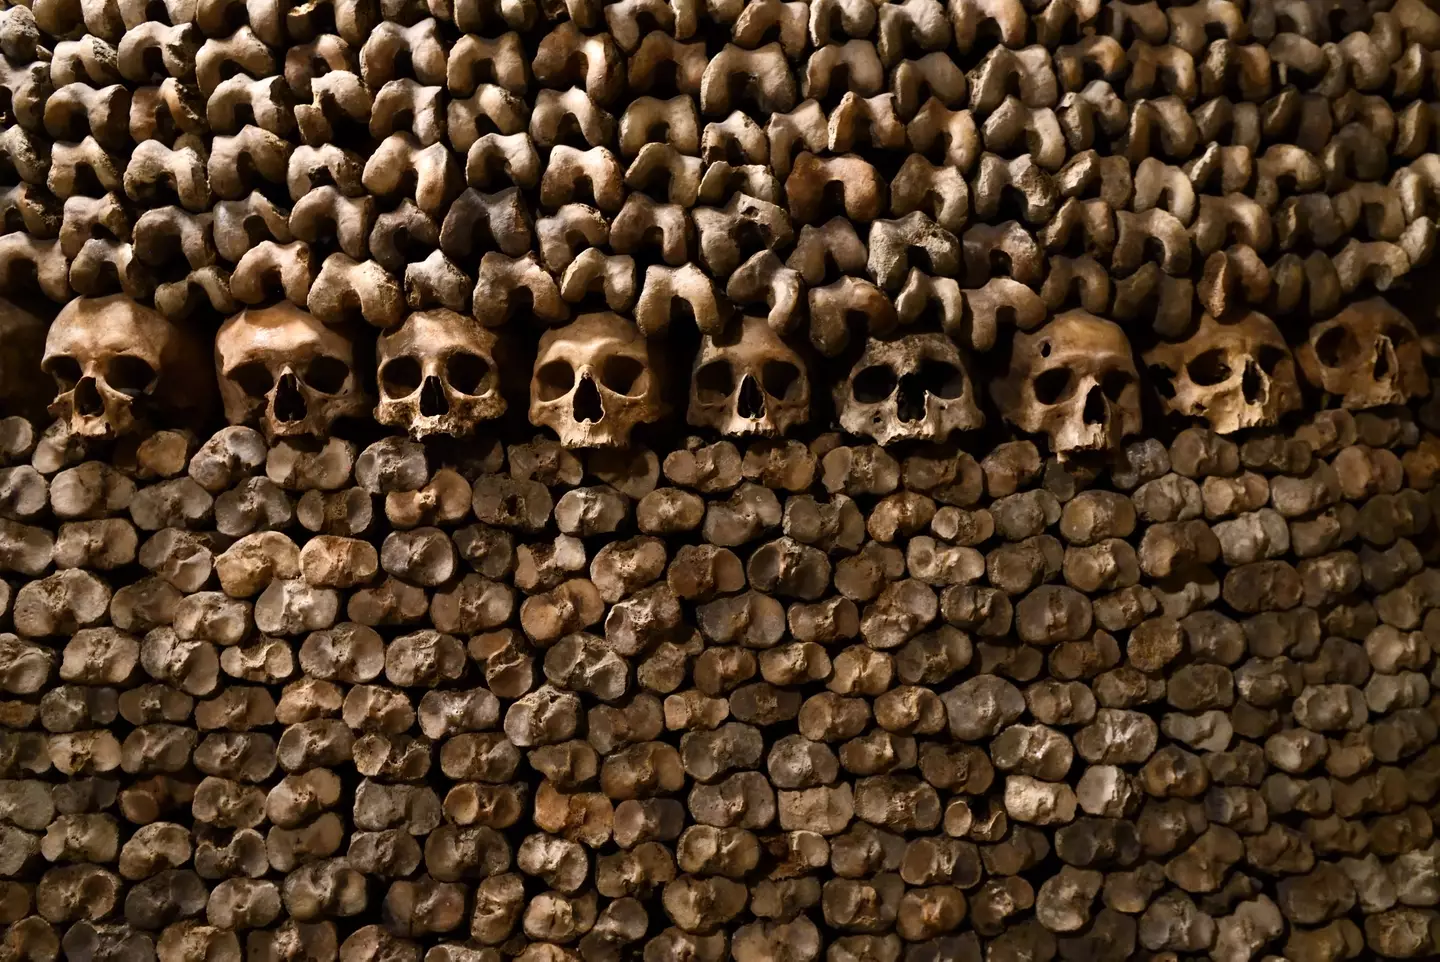 Not everybody who went exploring in the catacombs came back out alive again. (Frédéric Soltan/Corbis via Getty Images)